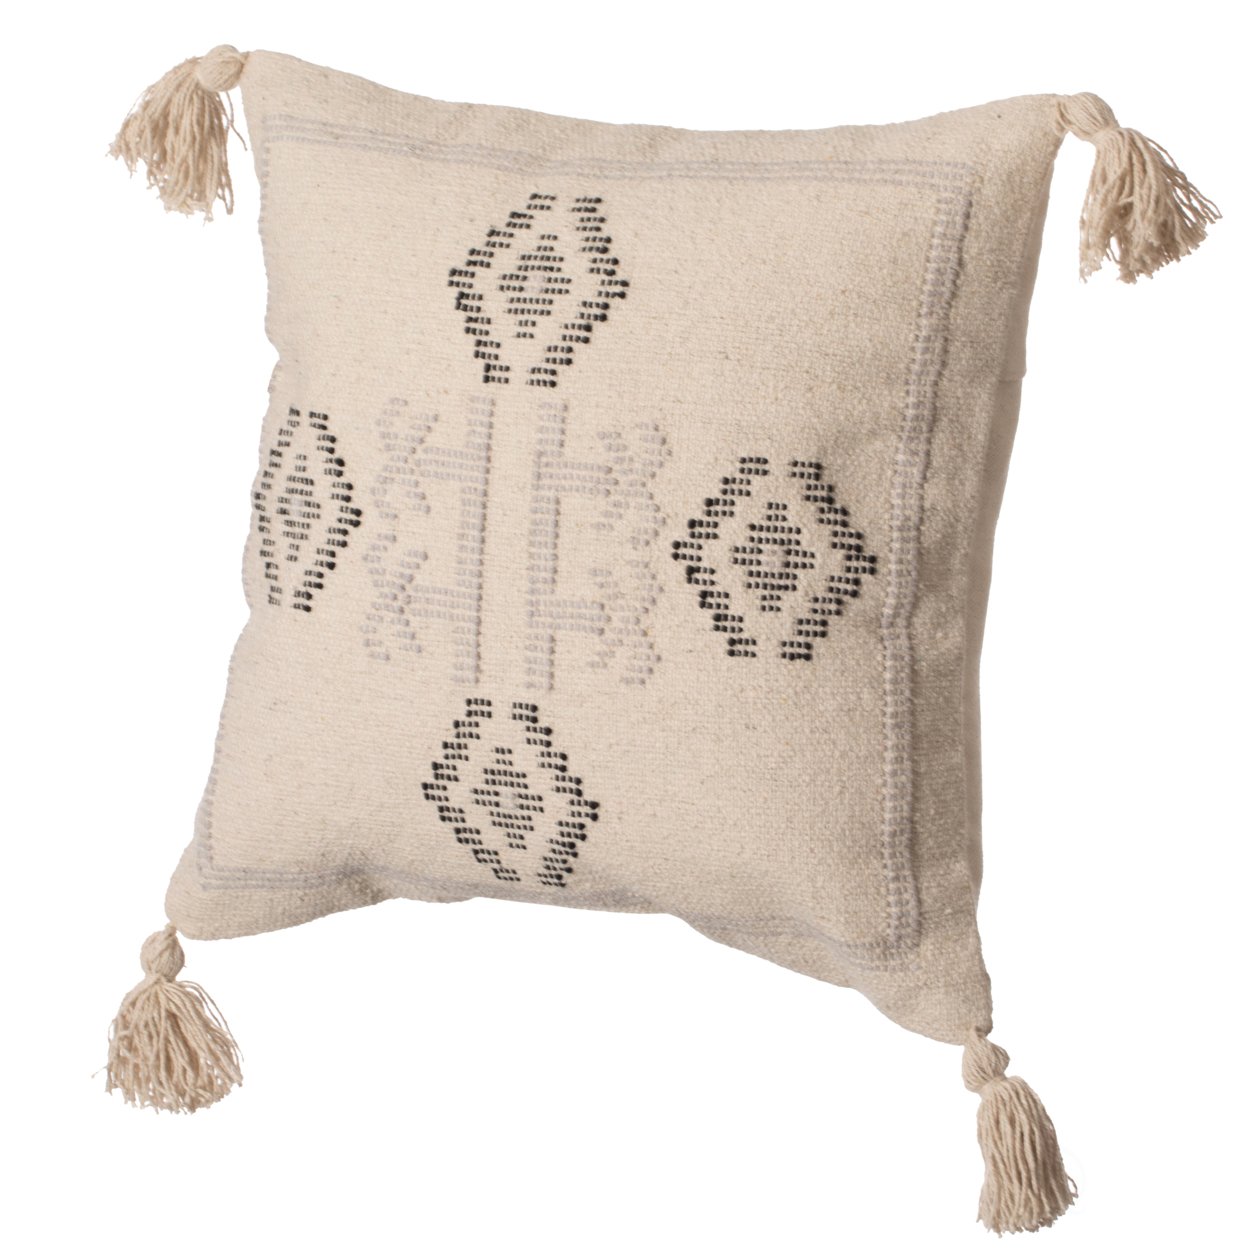 16 Handwoven Cotton Throw Pillow Cover With Tribal Aztec Design And Tassel Corners - Brown